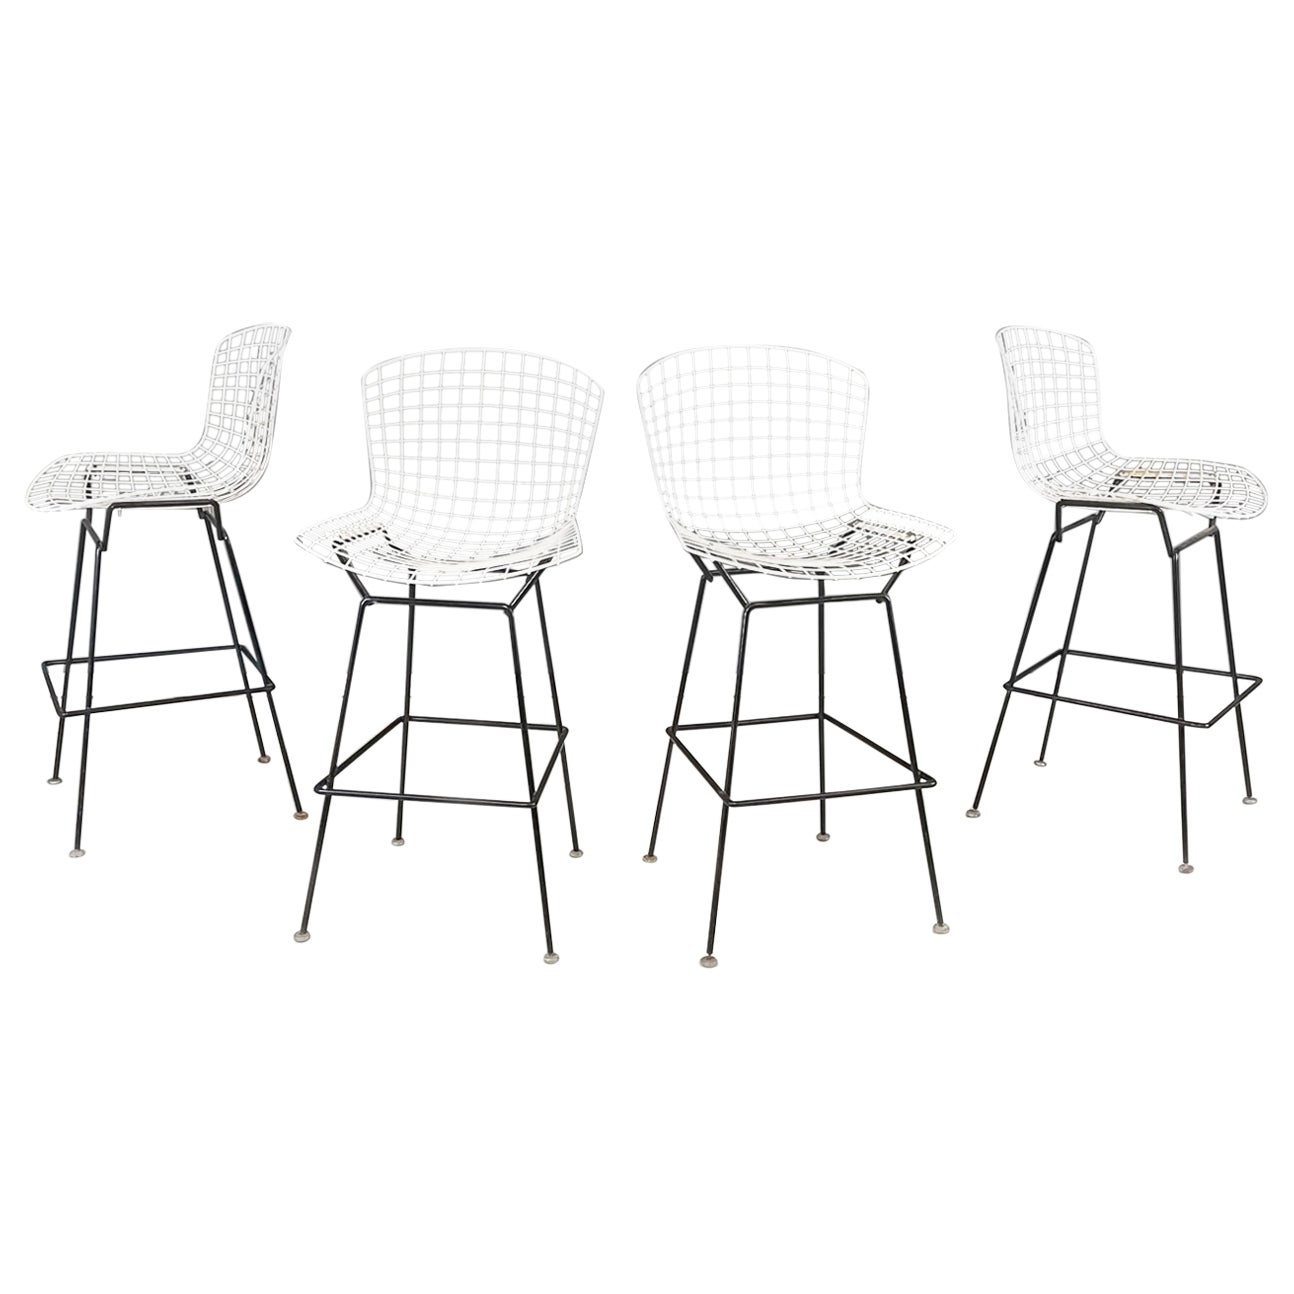 American Midcentury Black White Metal High Stools by Bertoia for Knoll, 1960s